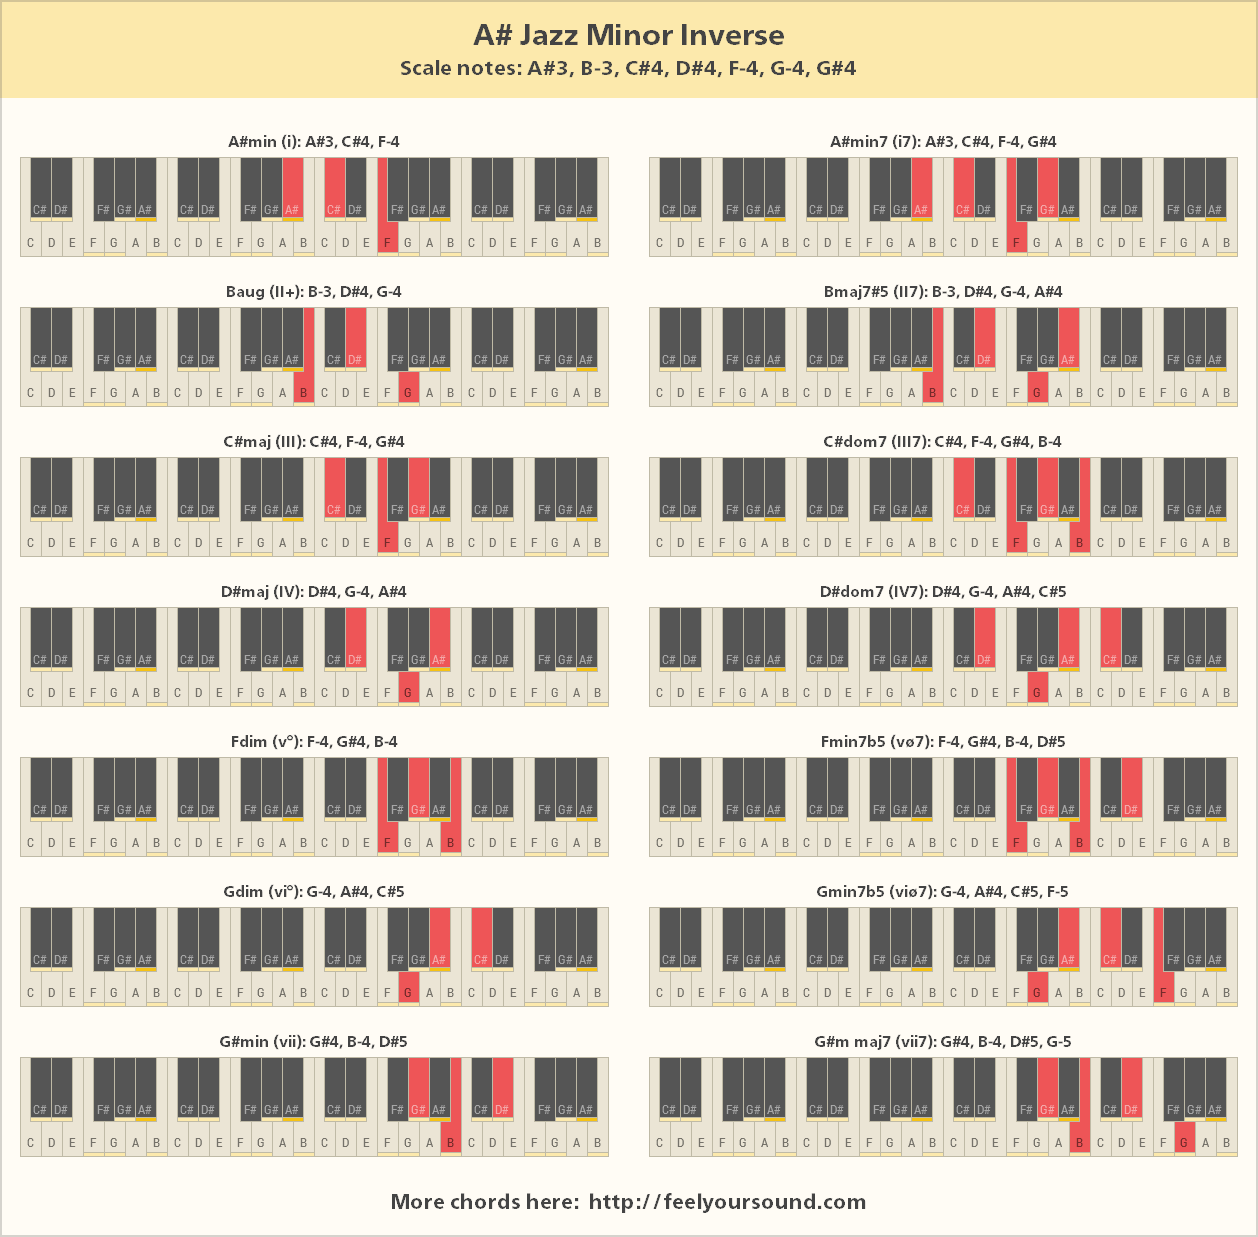 All important chords of A# Jazz Minor Inverse